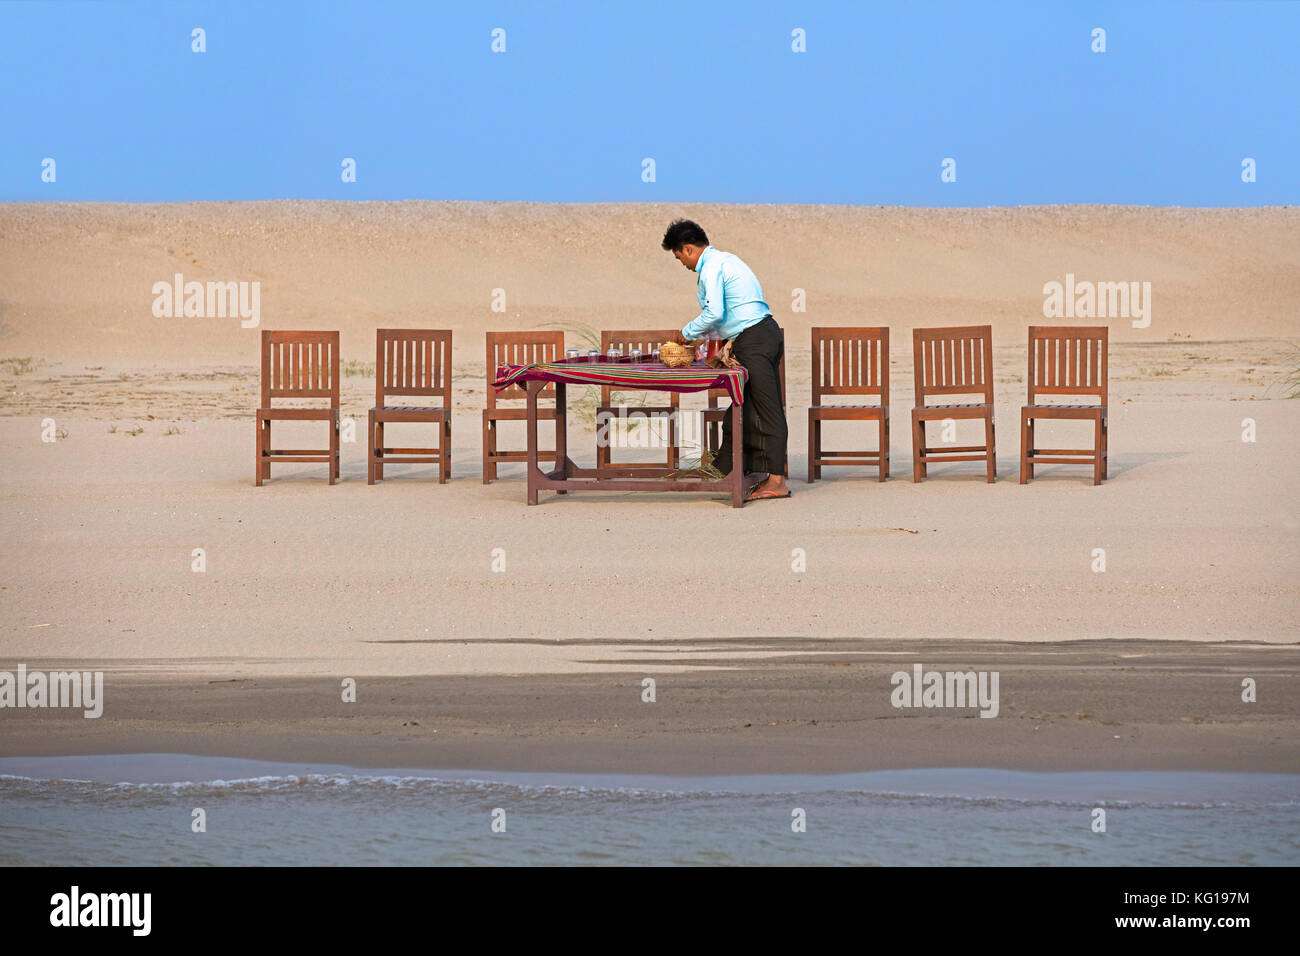 Burmese servant preparing dinner and setting the table for tourists at sunset along the Irrawaddy River / Ayeyarwady River in Myanmar / Burma Stock Photo